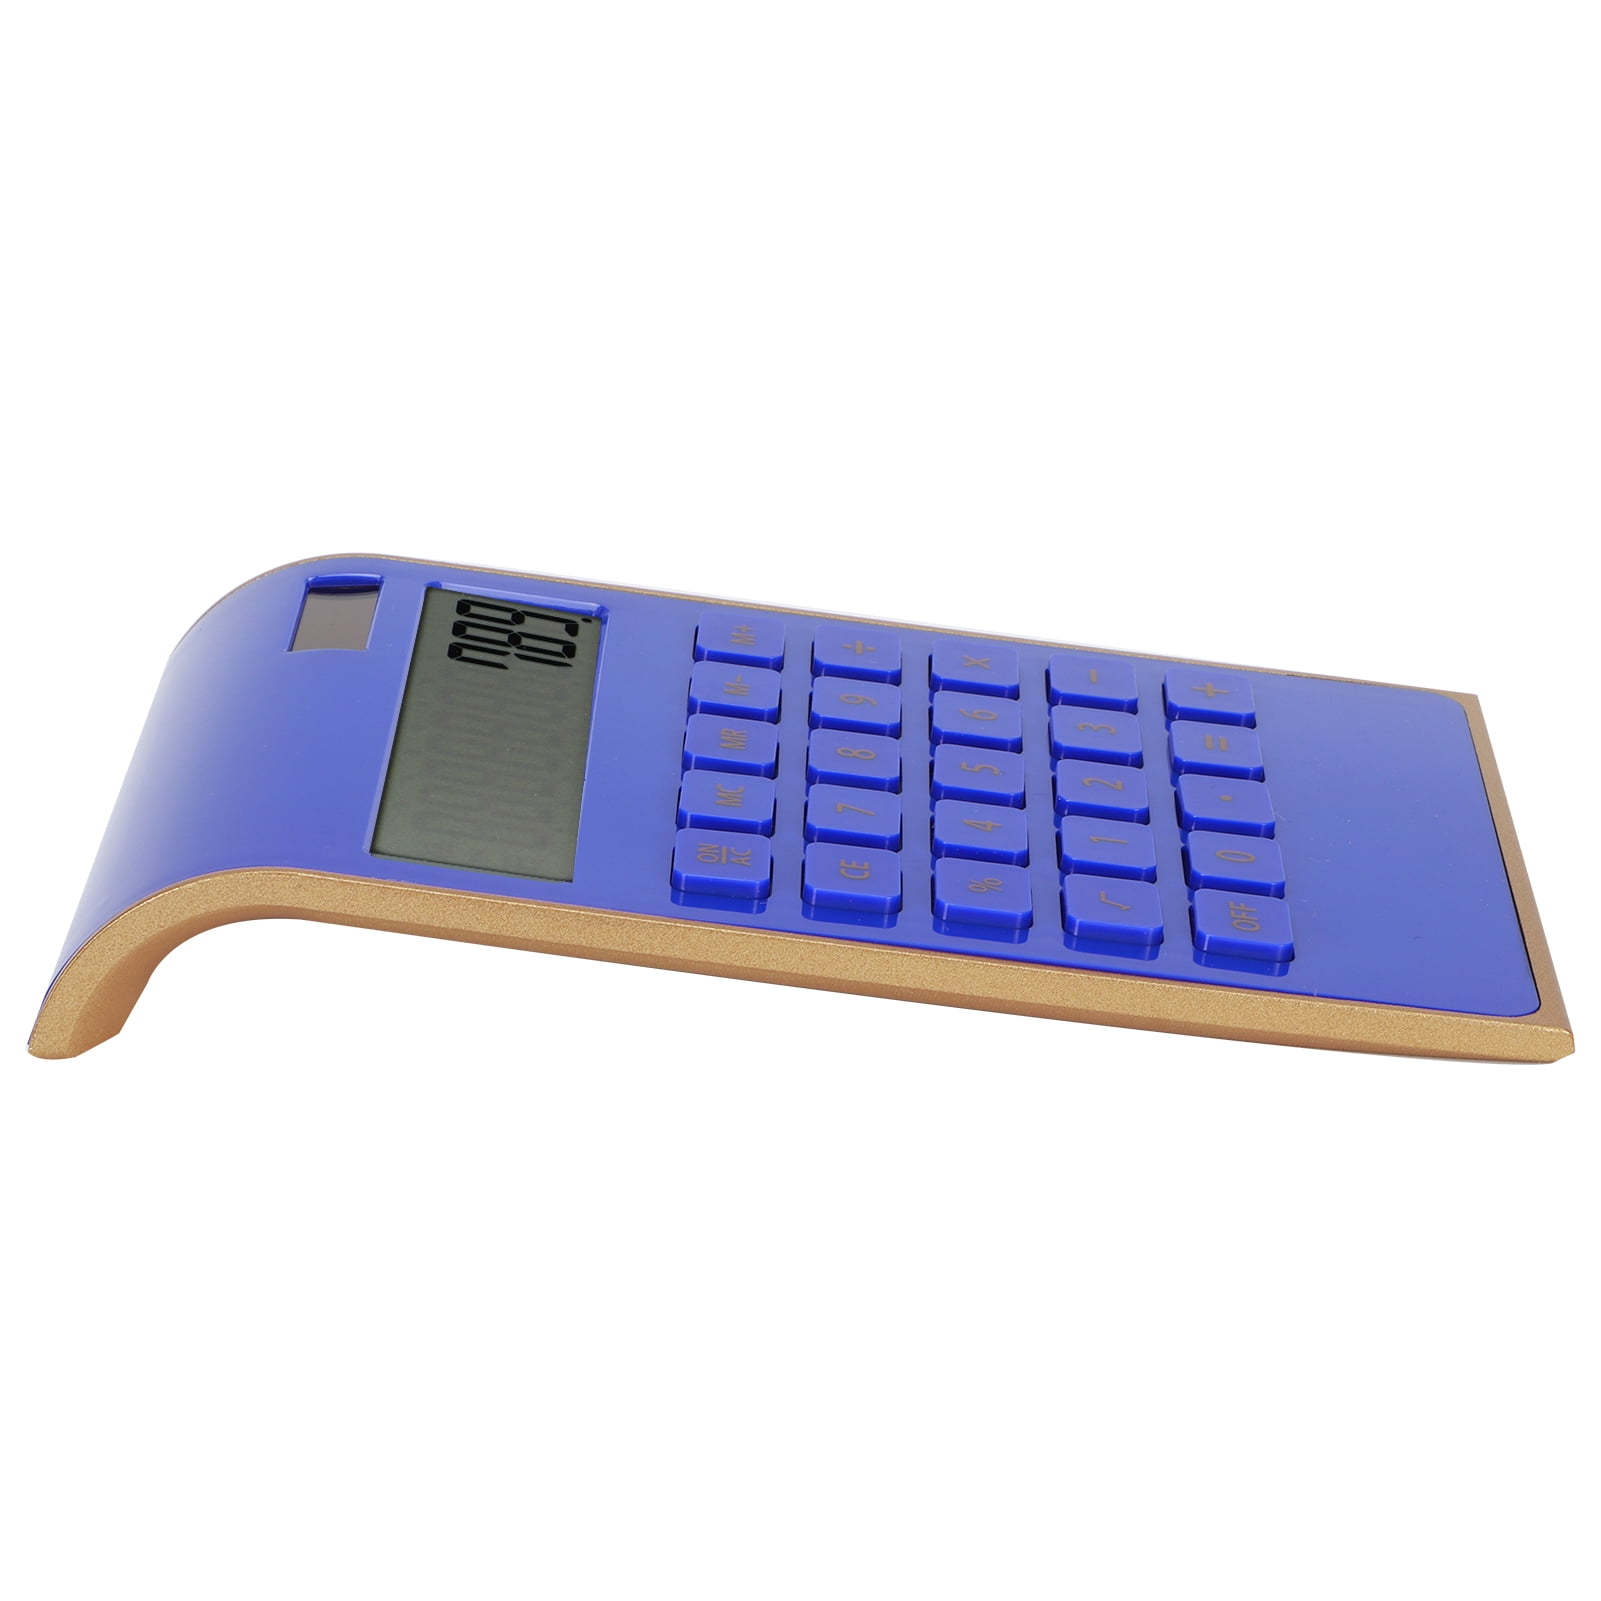 Details about   Slim Business Card Holder Calculator + Business Card 